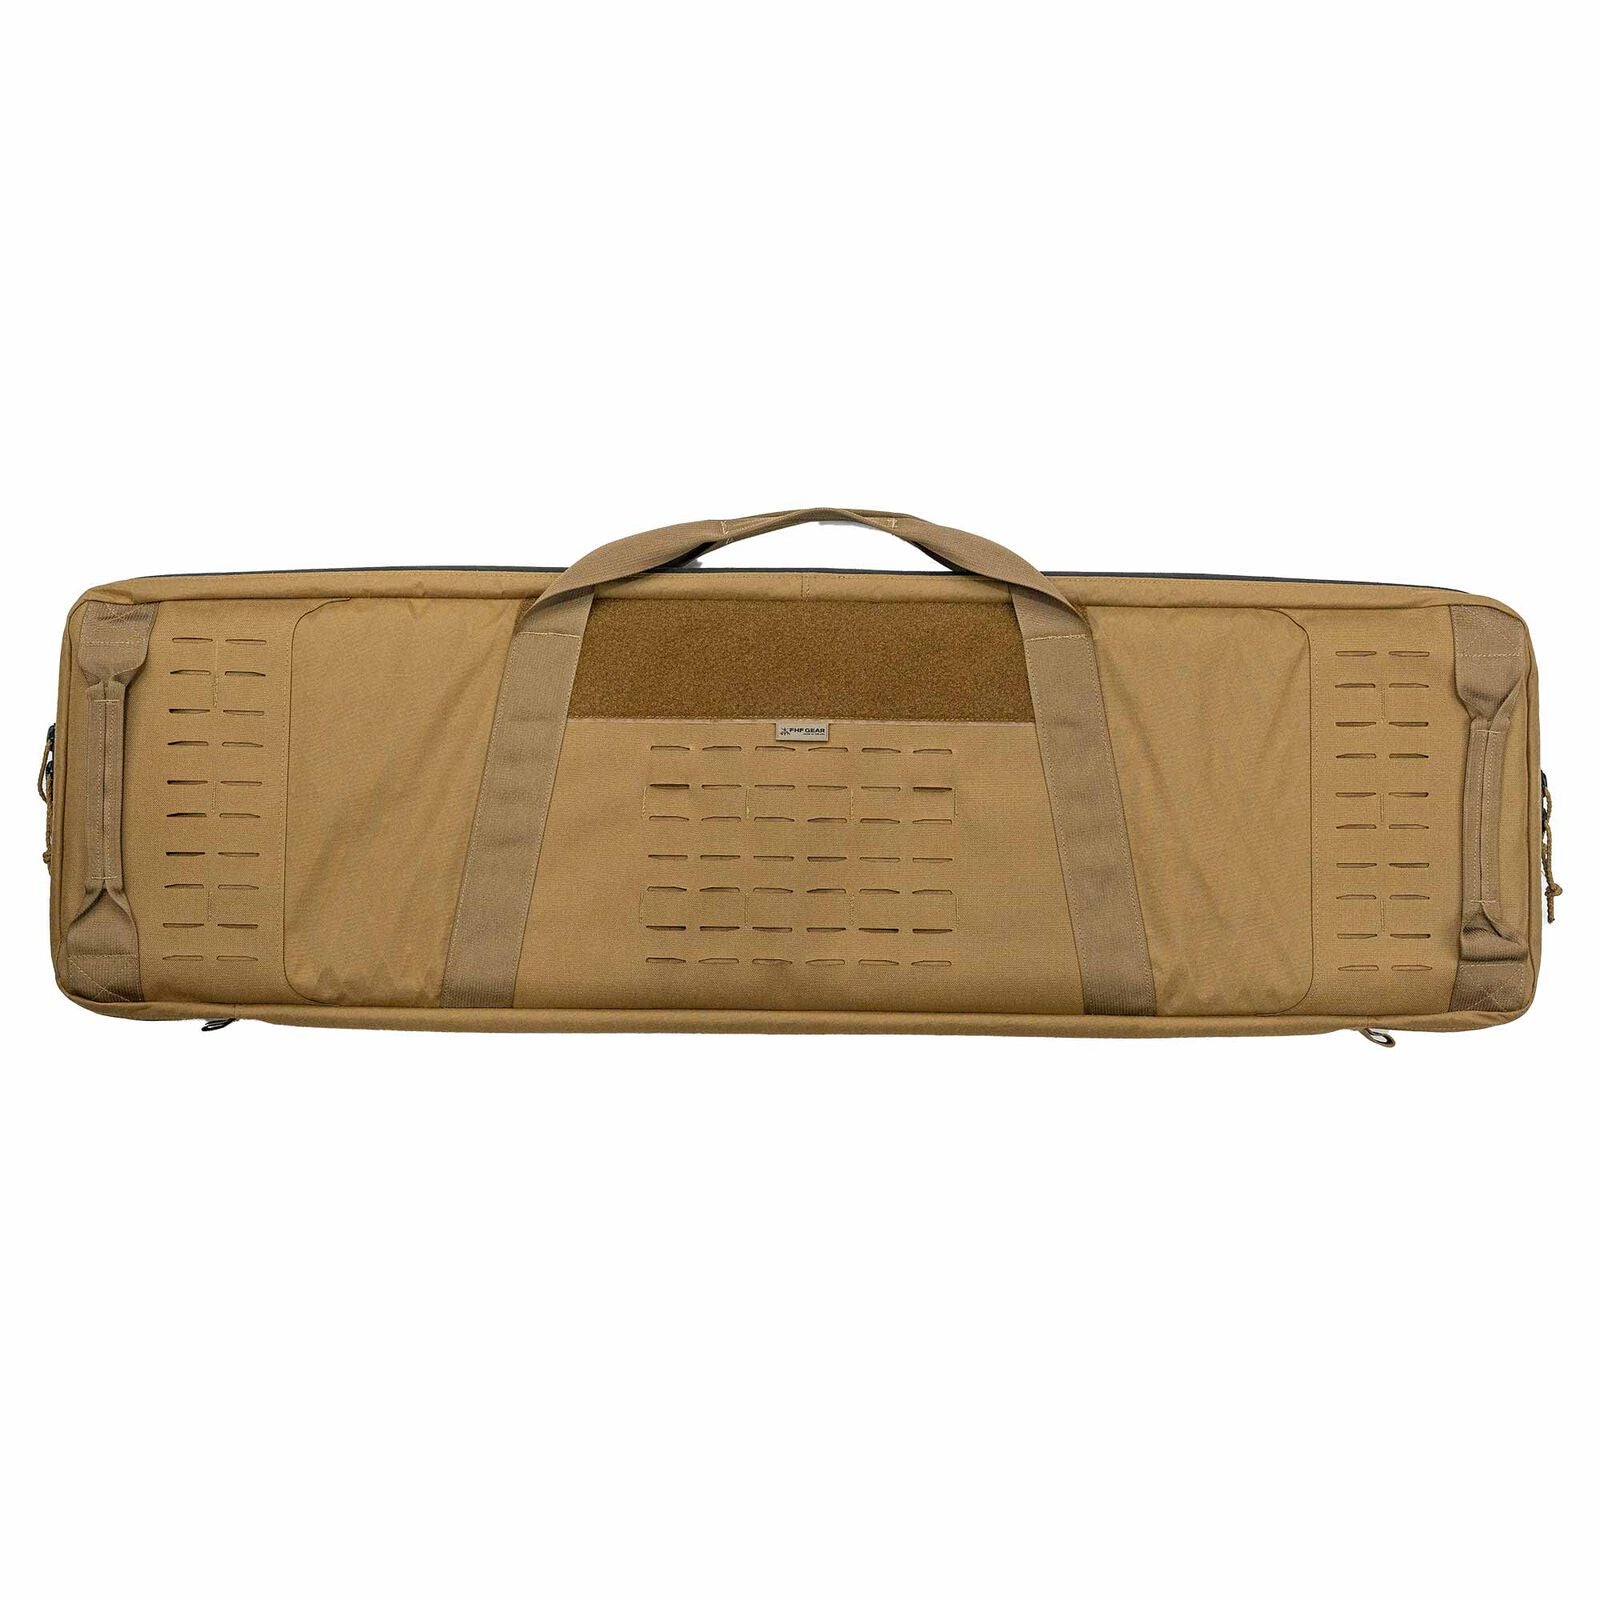 FHF Gear Tac Mtn Rifle Case Coyote Back